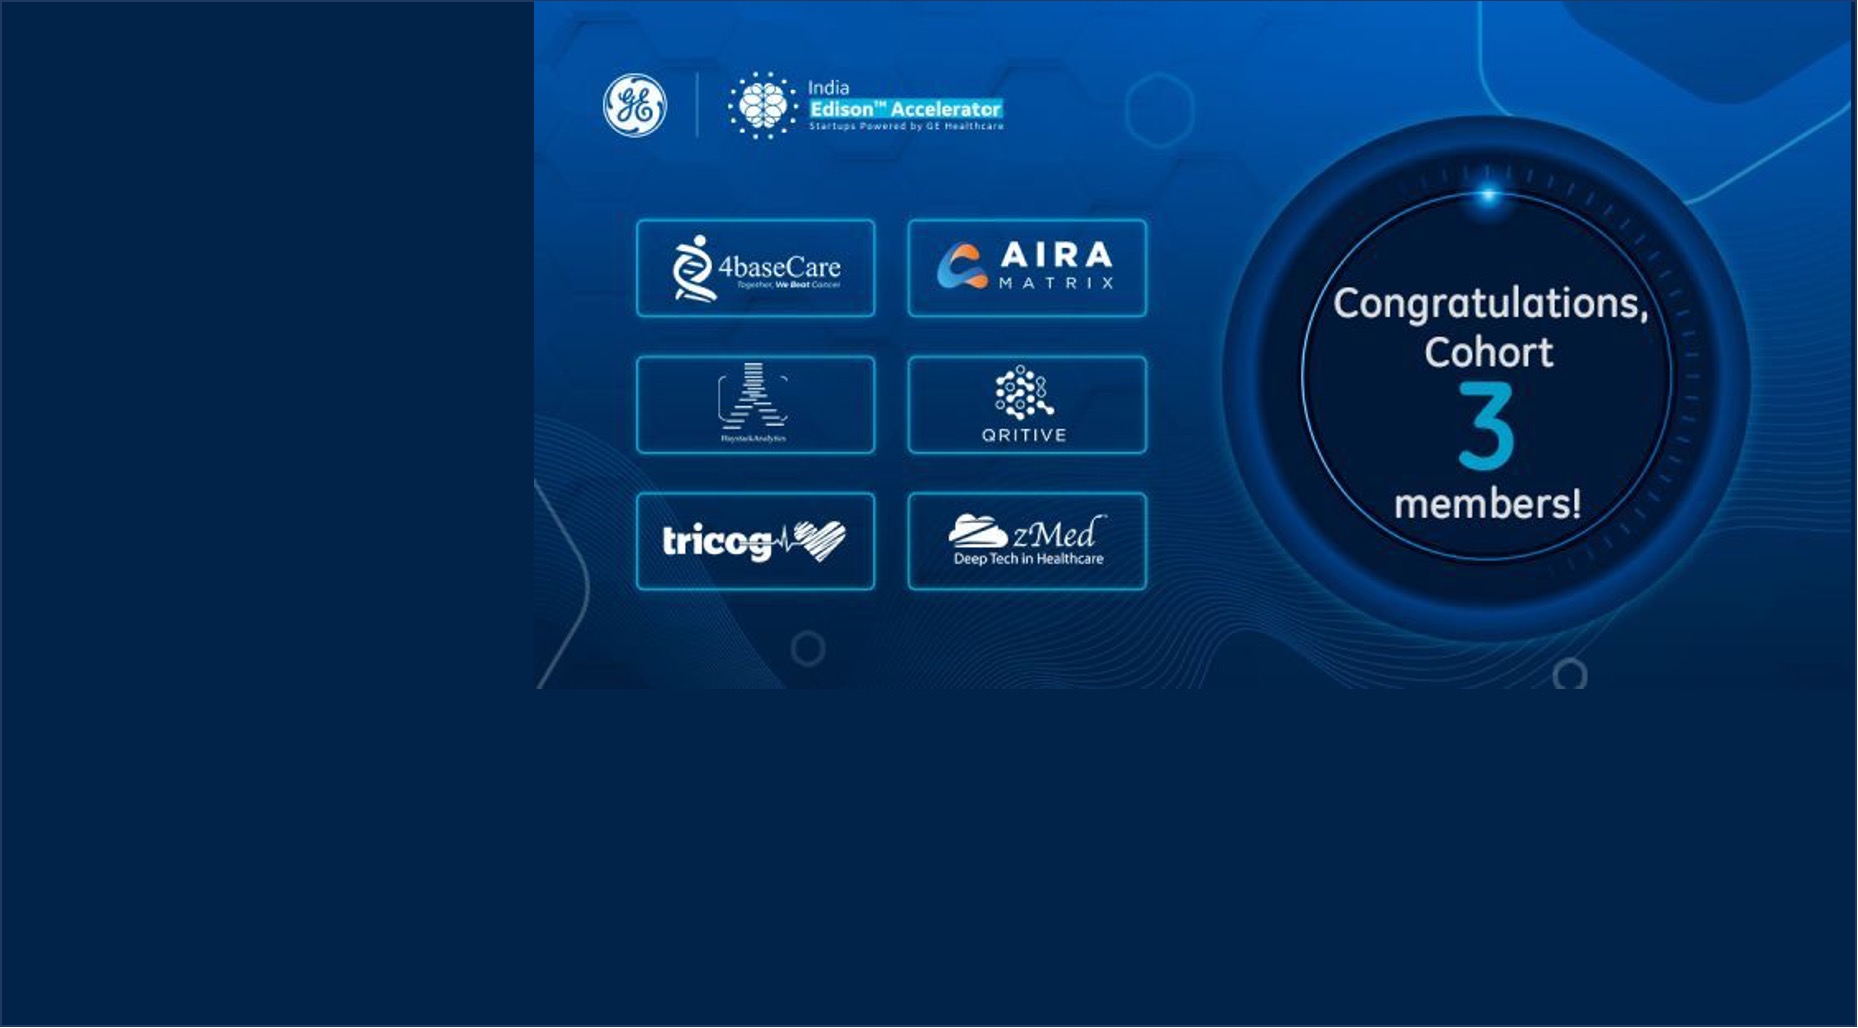 AIRAMATRIX selected in the 3rd cohort of the GE Healthcare India Edison Accelerator program